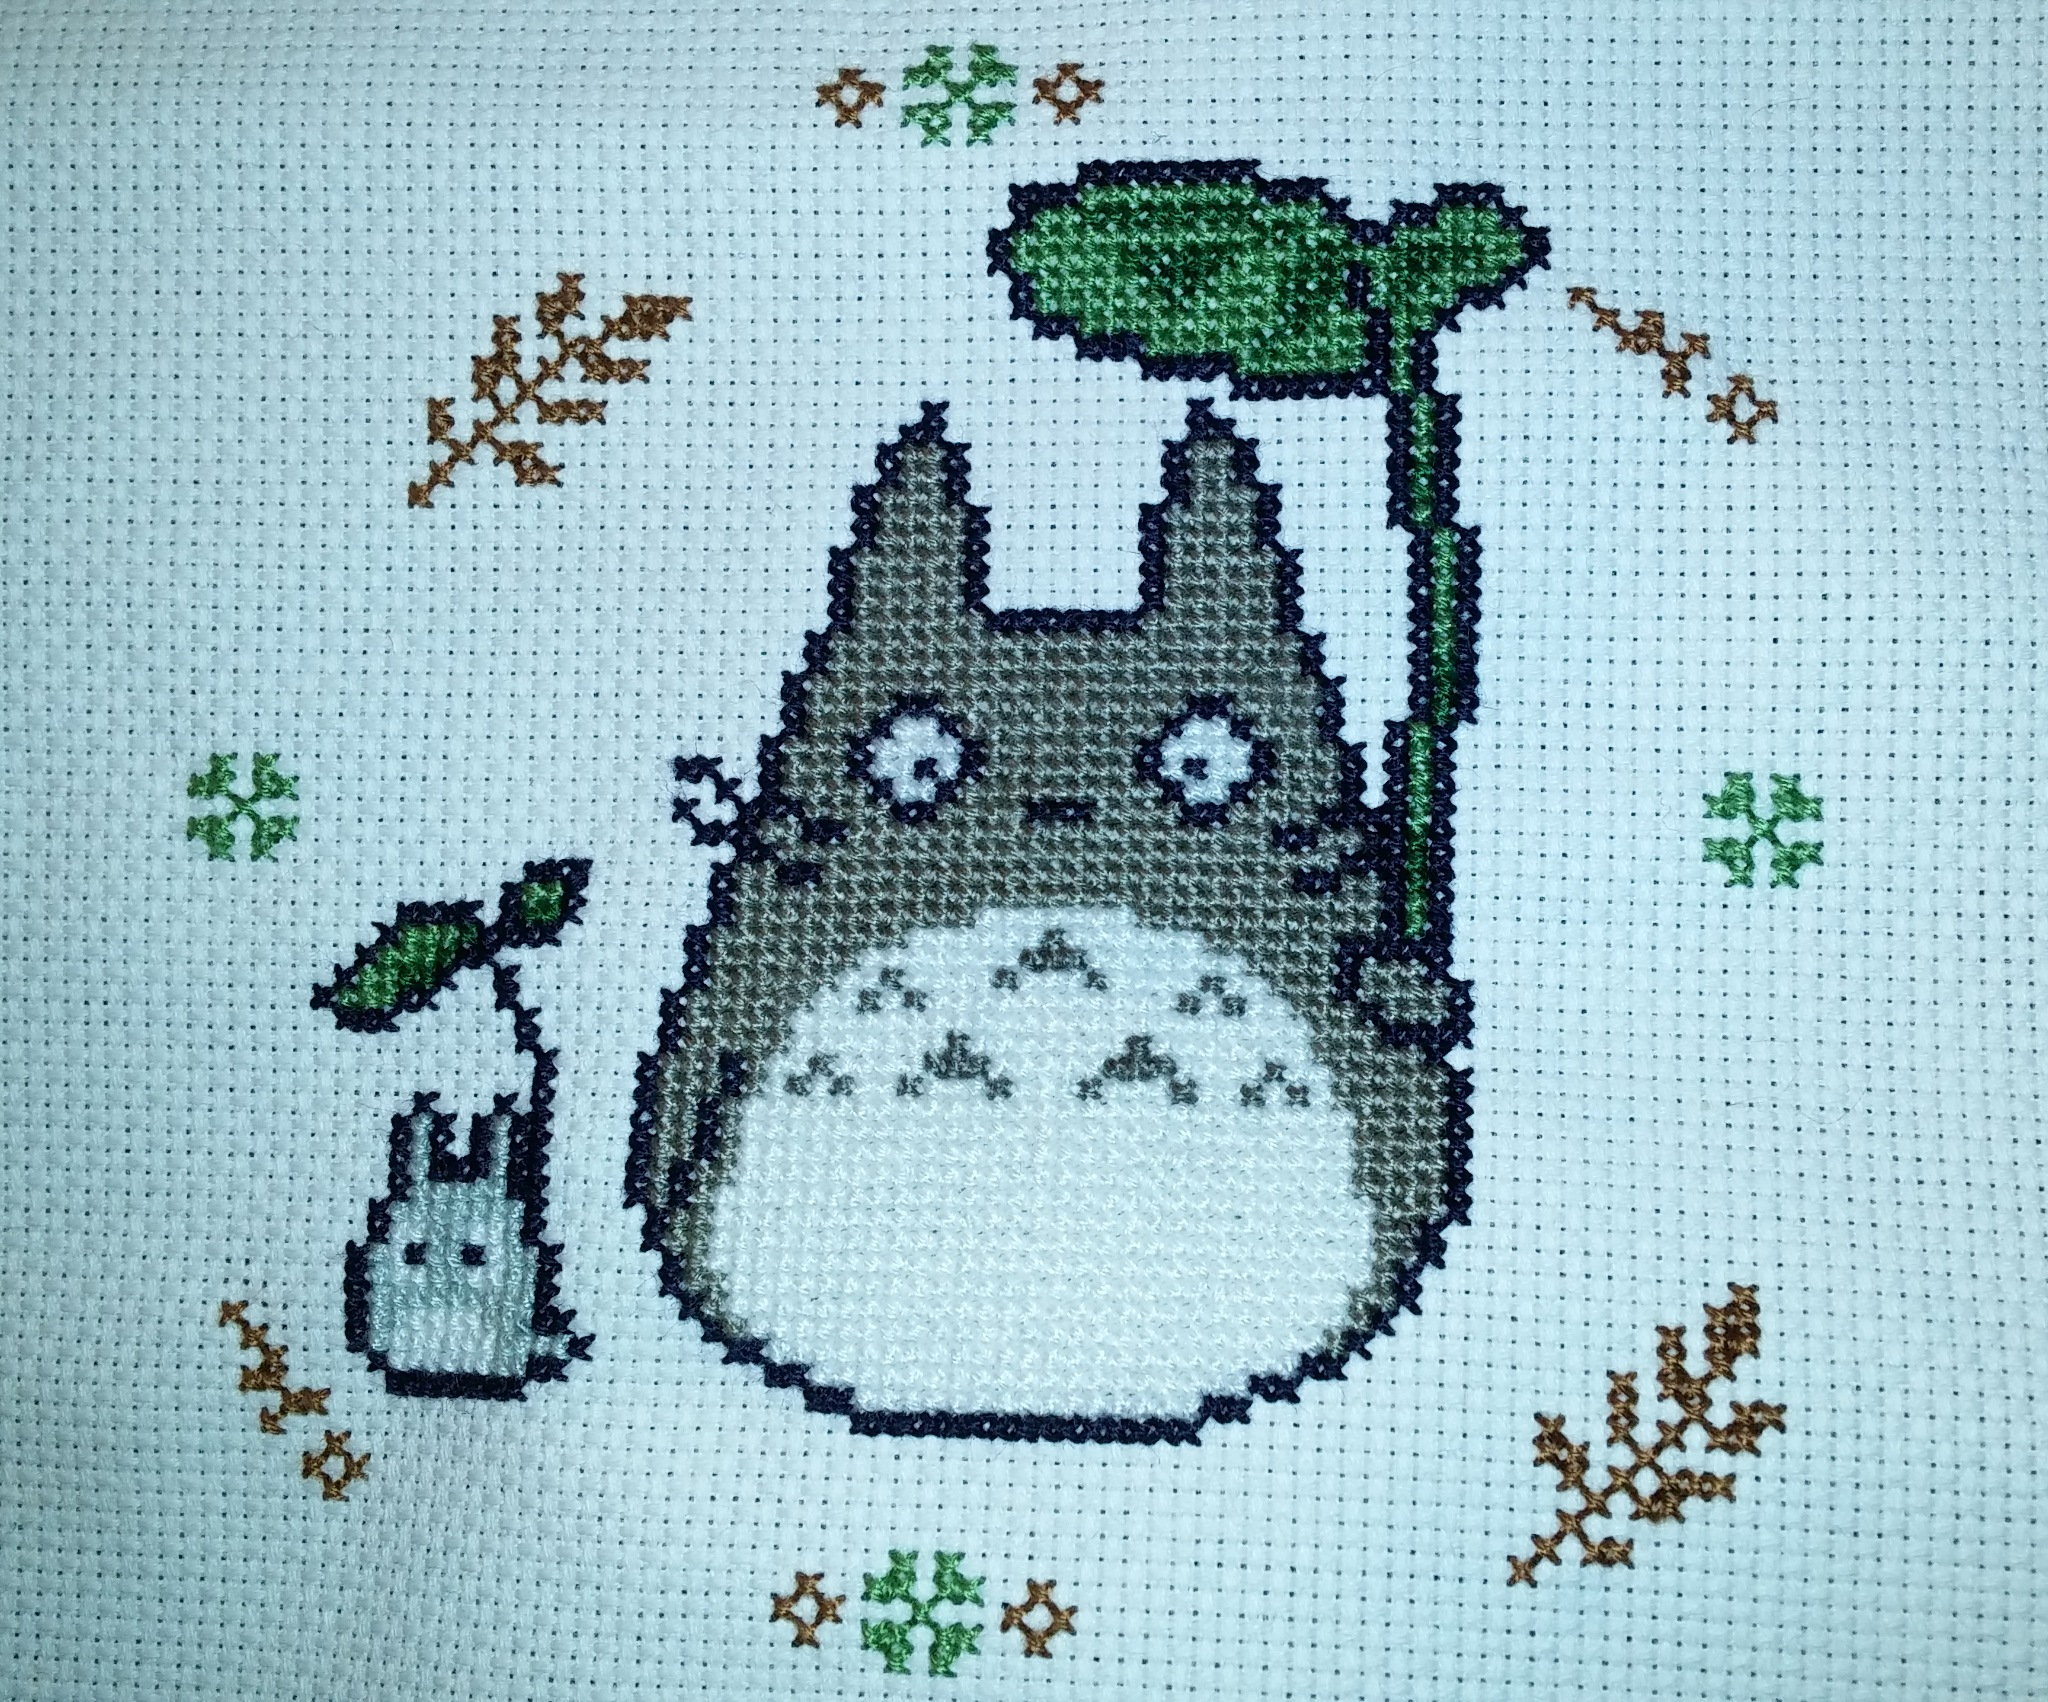 Totoro Embroidery Pattern Totoro A Bird Is Singing To Blue Sky